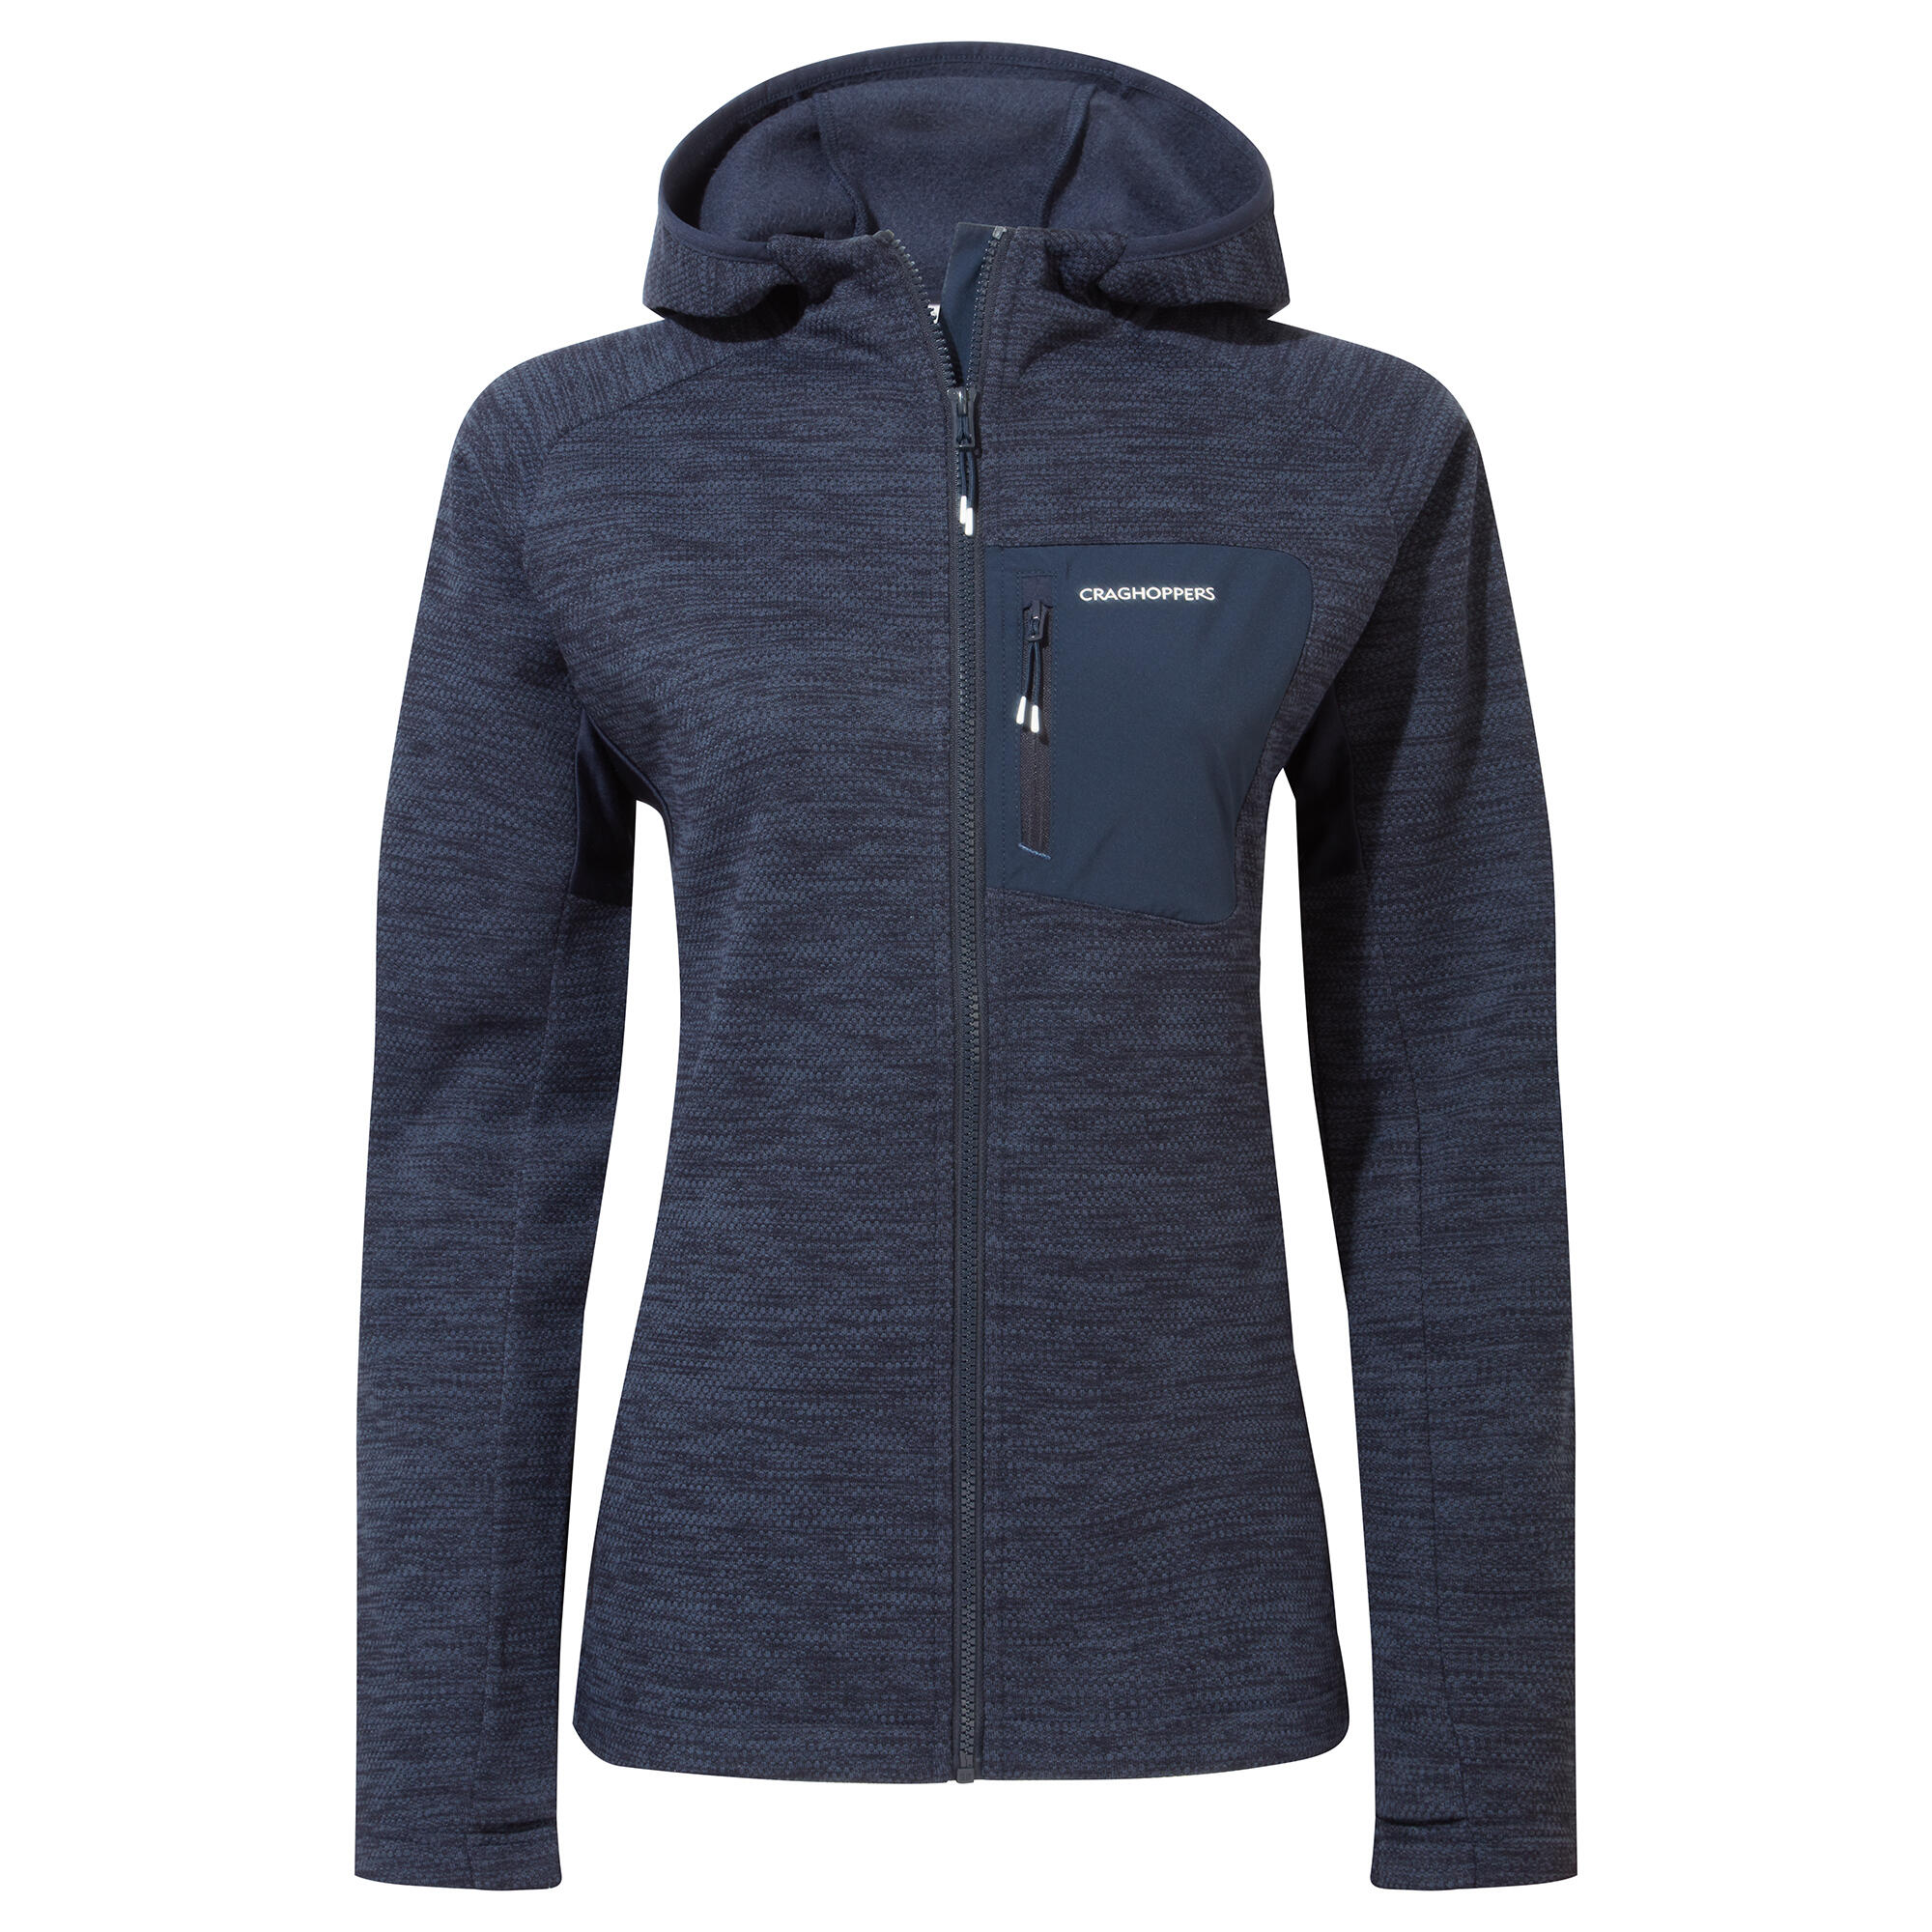 CRAGHOPPERS Women's Trina Hooded Jacket